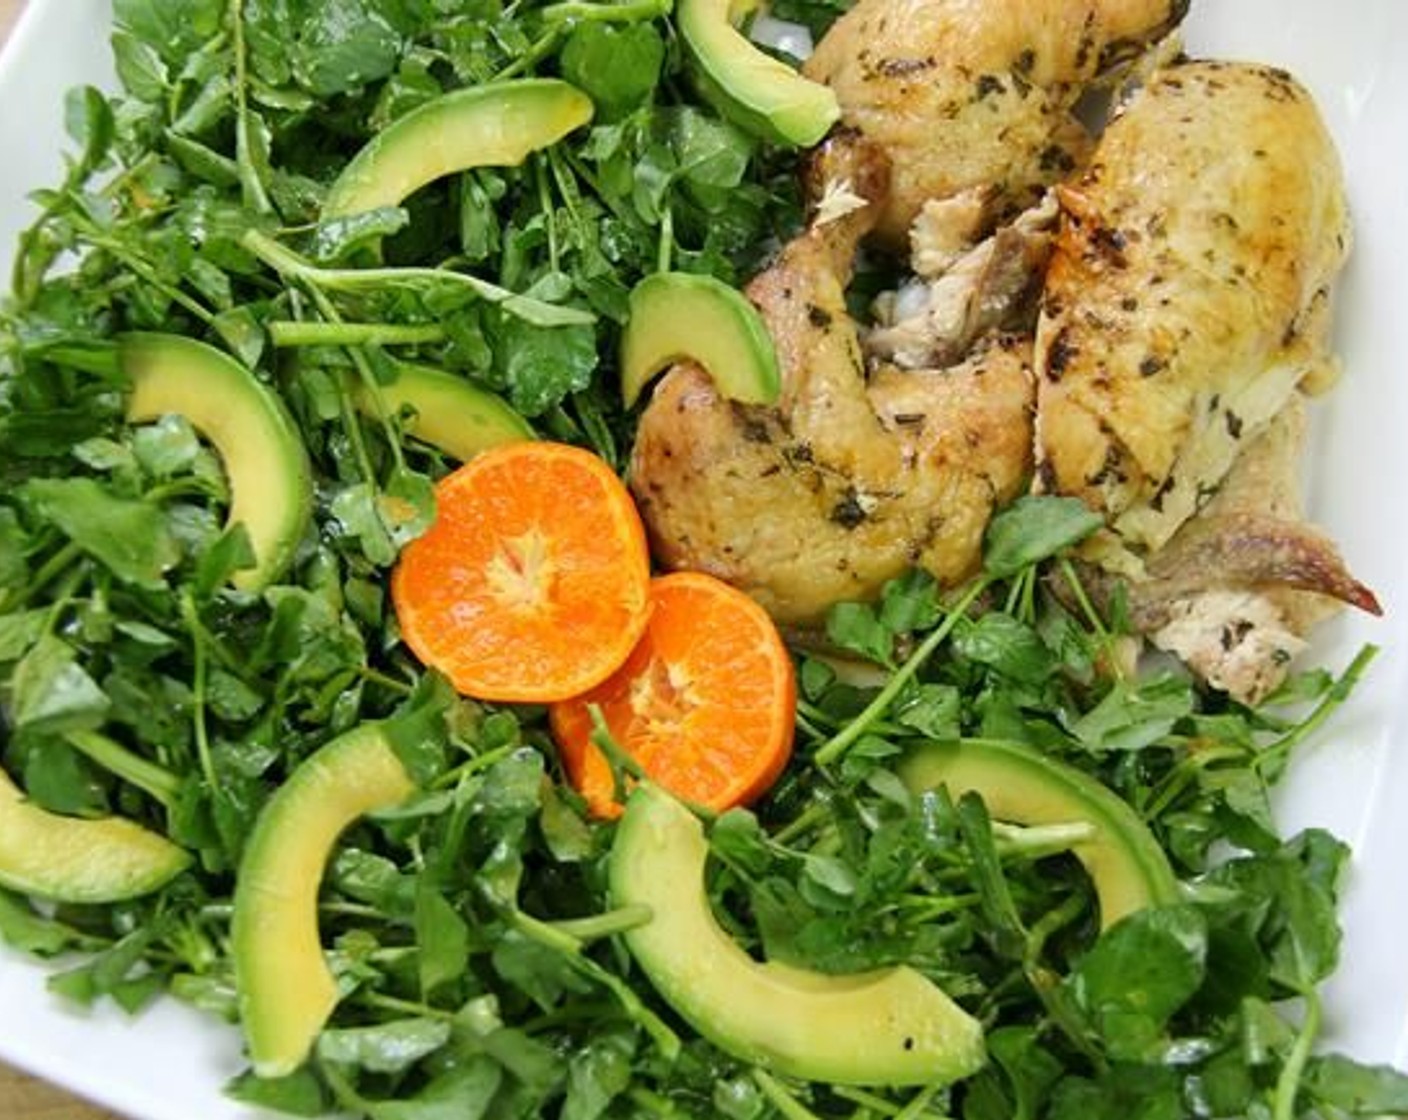 Avocado, Watercress Salad with a Clementine Vinaigrette